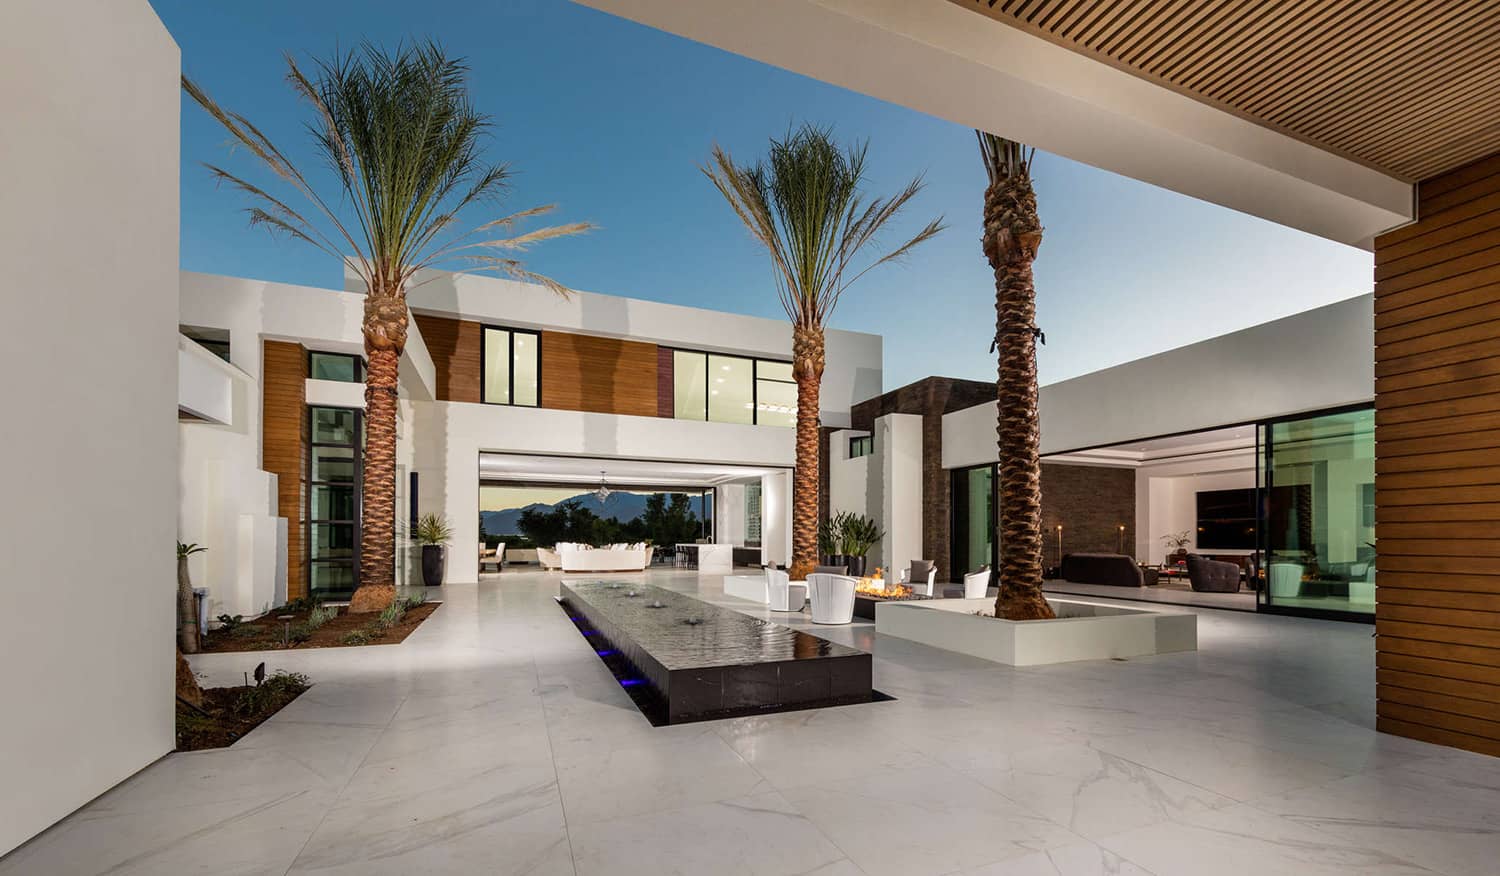 Chang-Residence-in-Palm-Springs-California-by-South-Coast-Architects-2